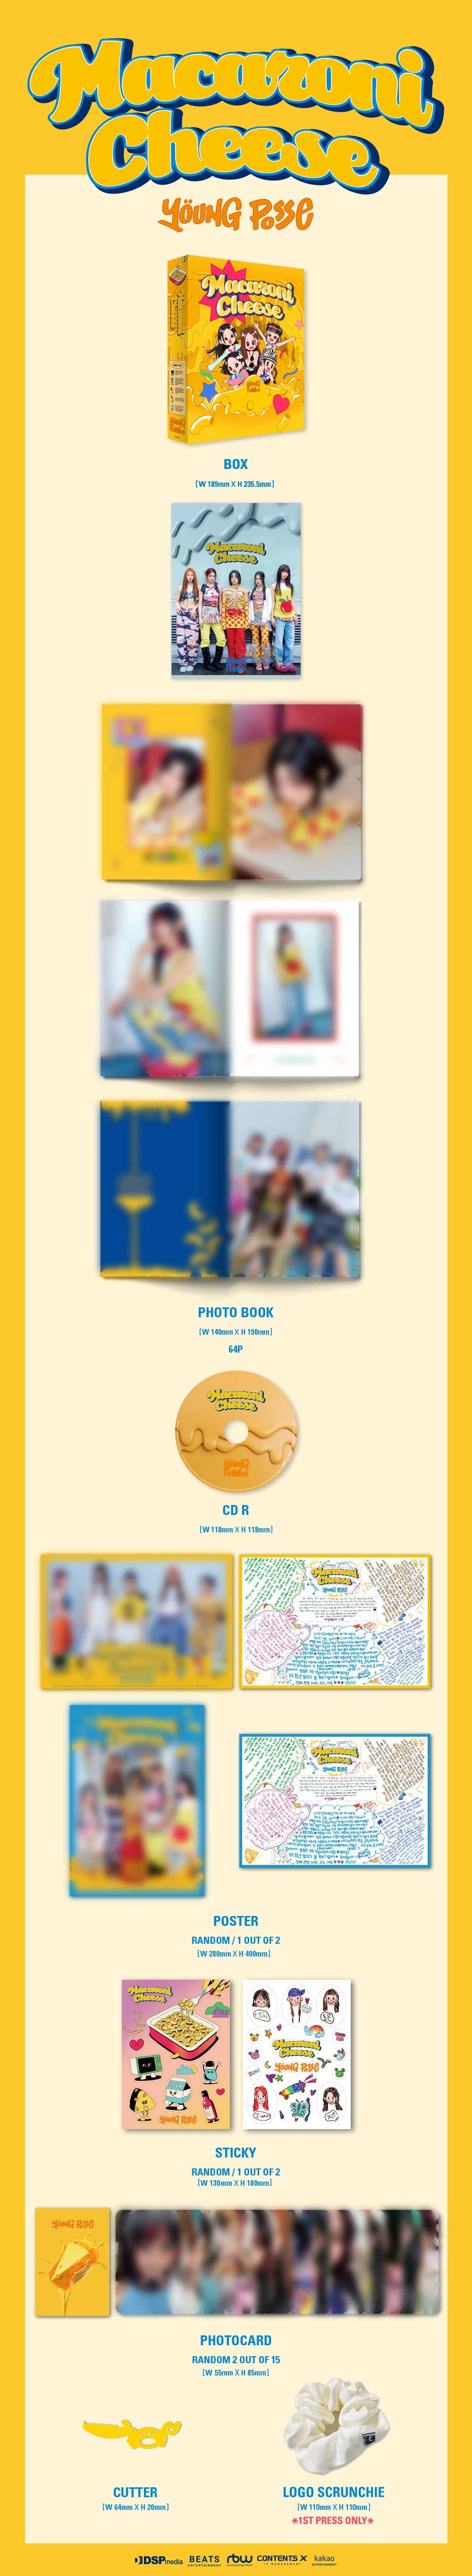 [PRE-ORDER] YOUNG POSSE - 1st EP [MACARONI CHEESE] + Makestar Photocard